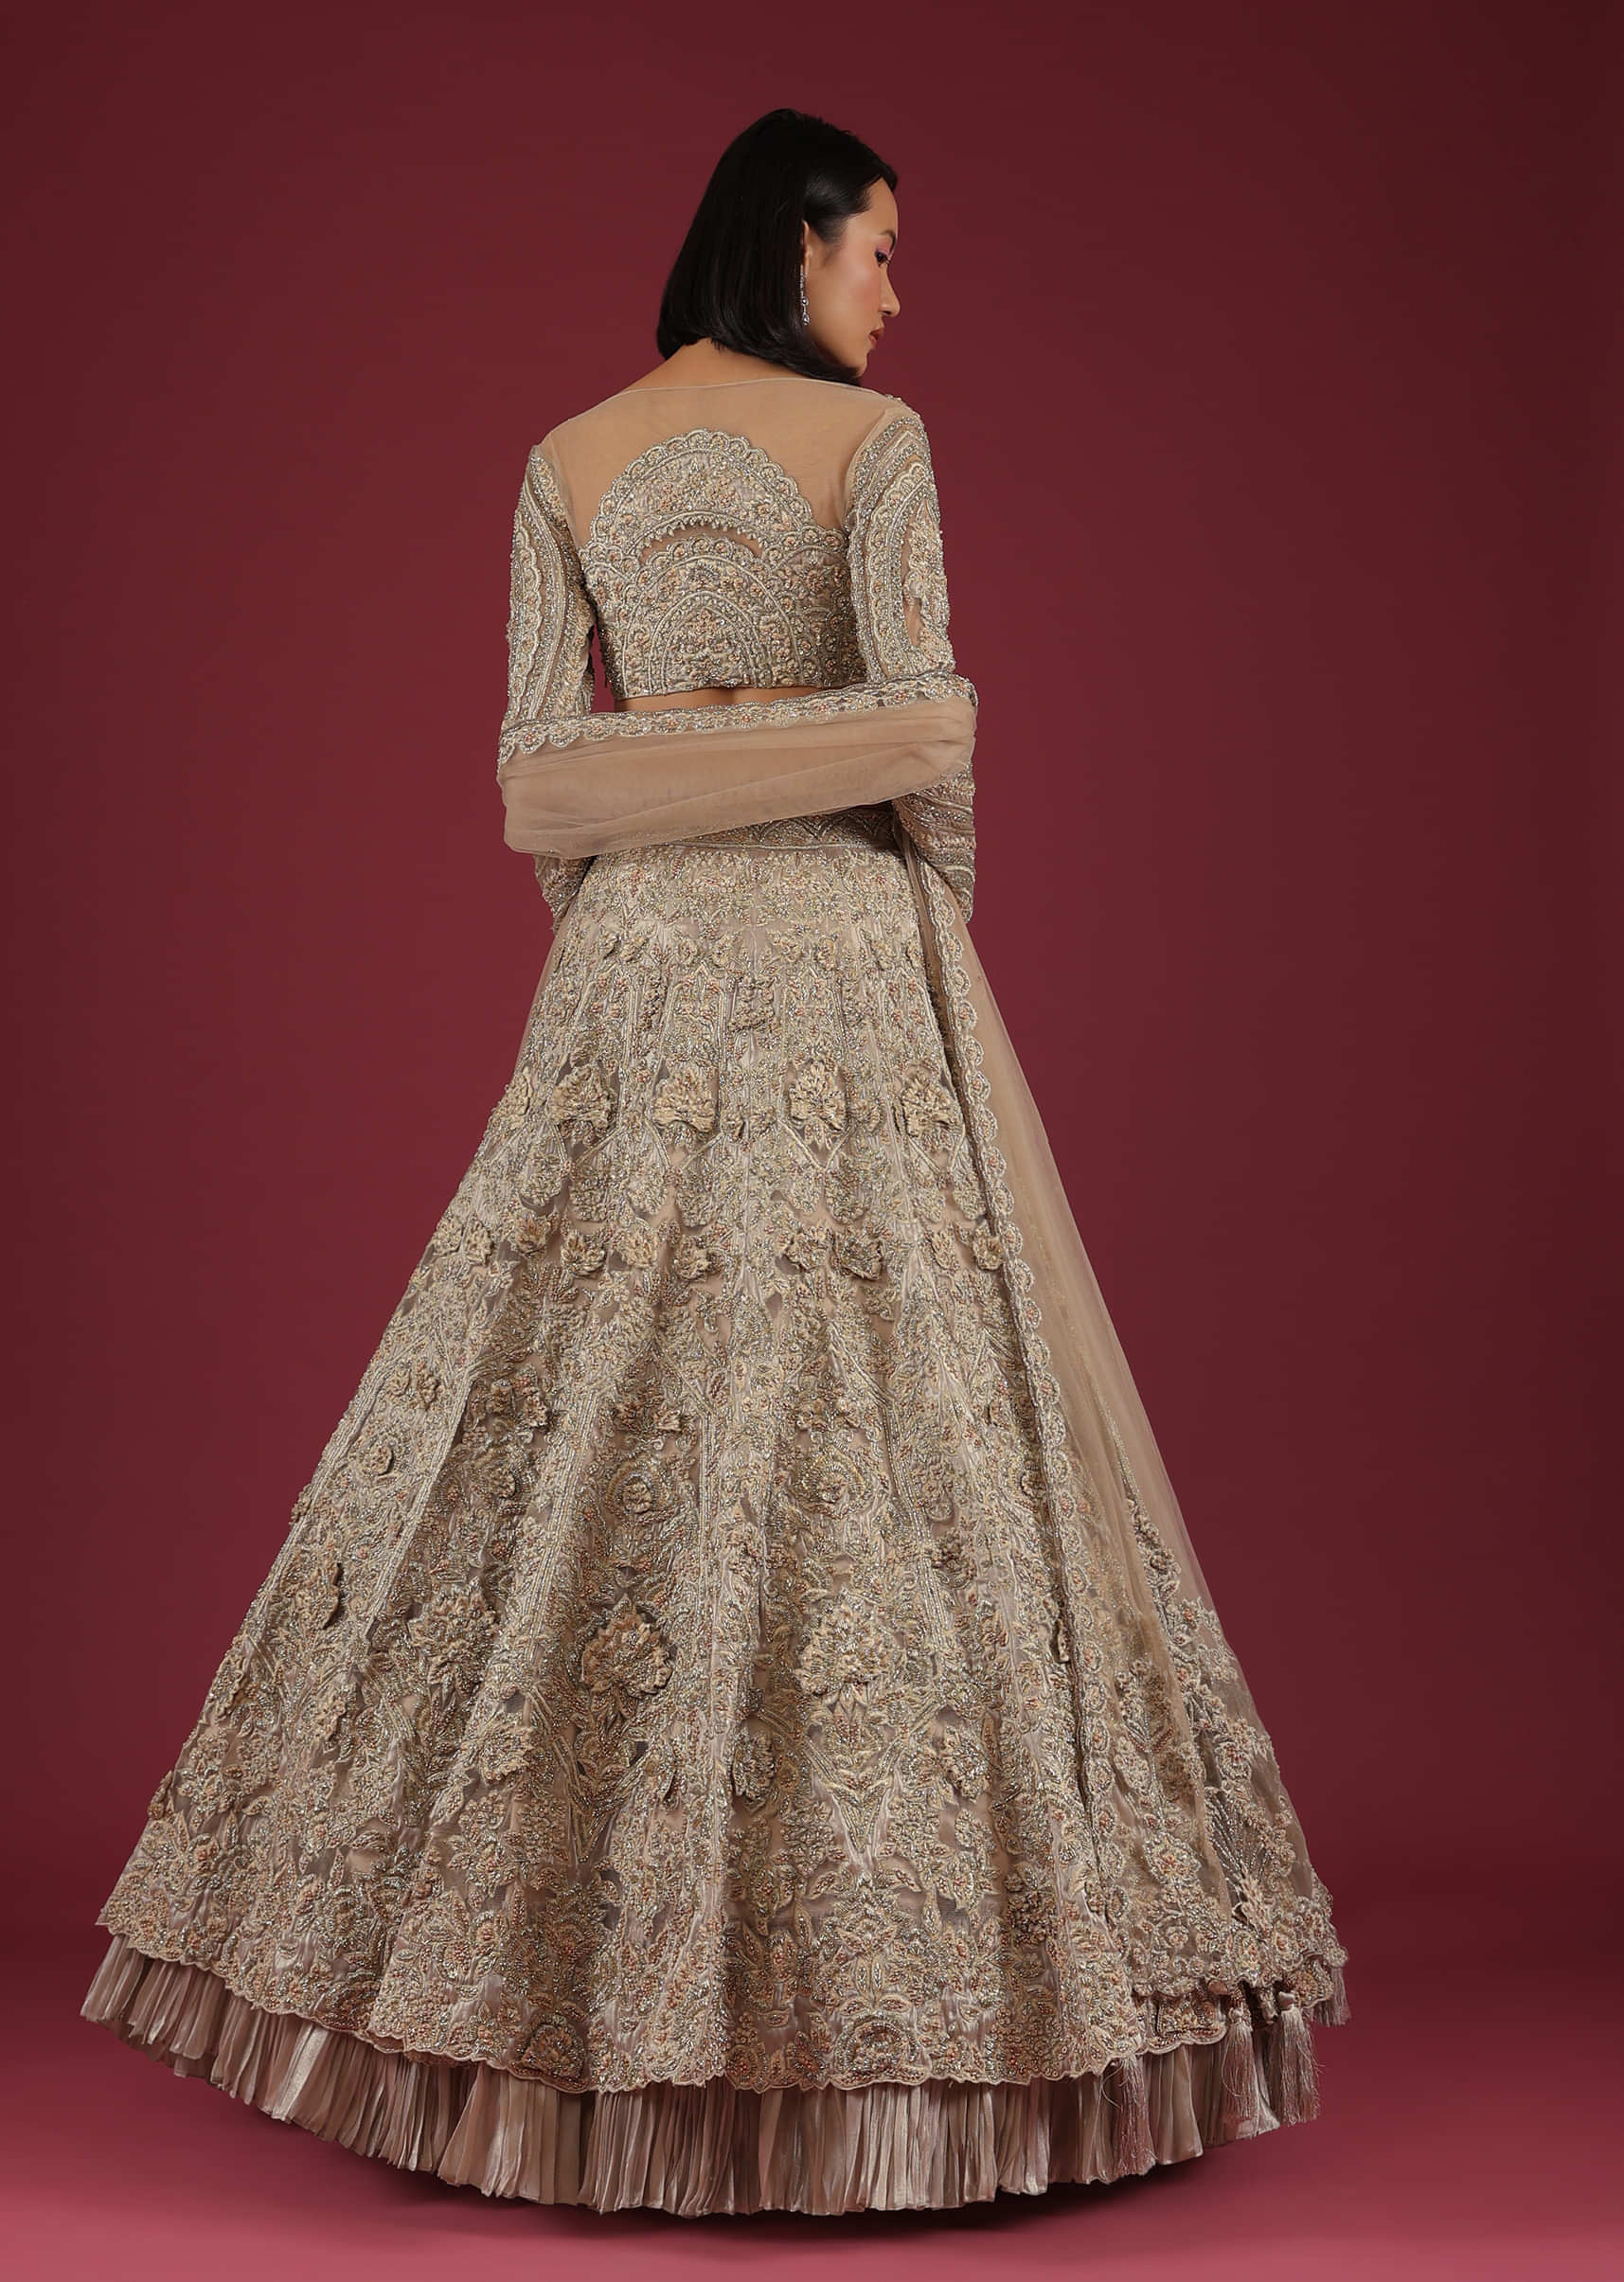 Oyster Royal Heritage Lehenga And Choli With Detailed Hand Embroidered Floral Kalis And Plunging Neckline